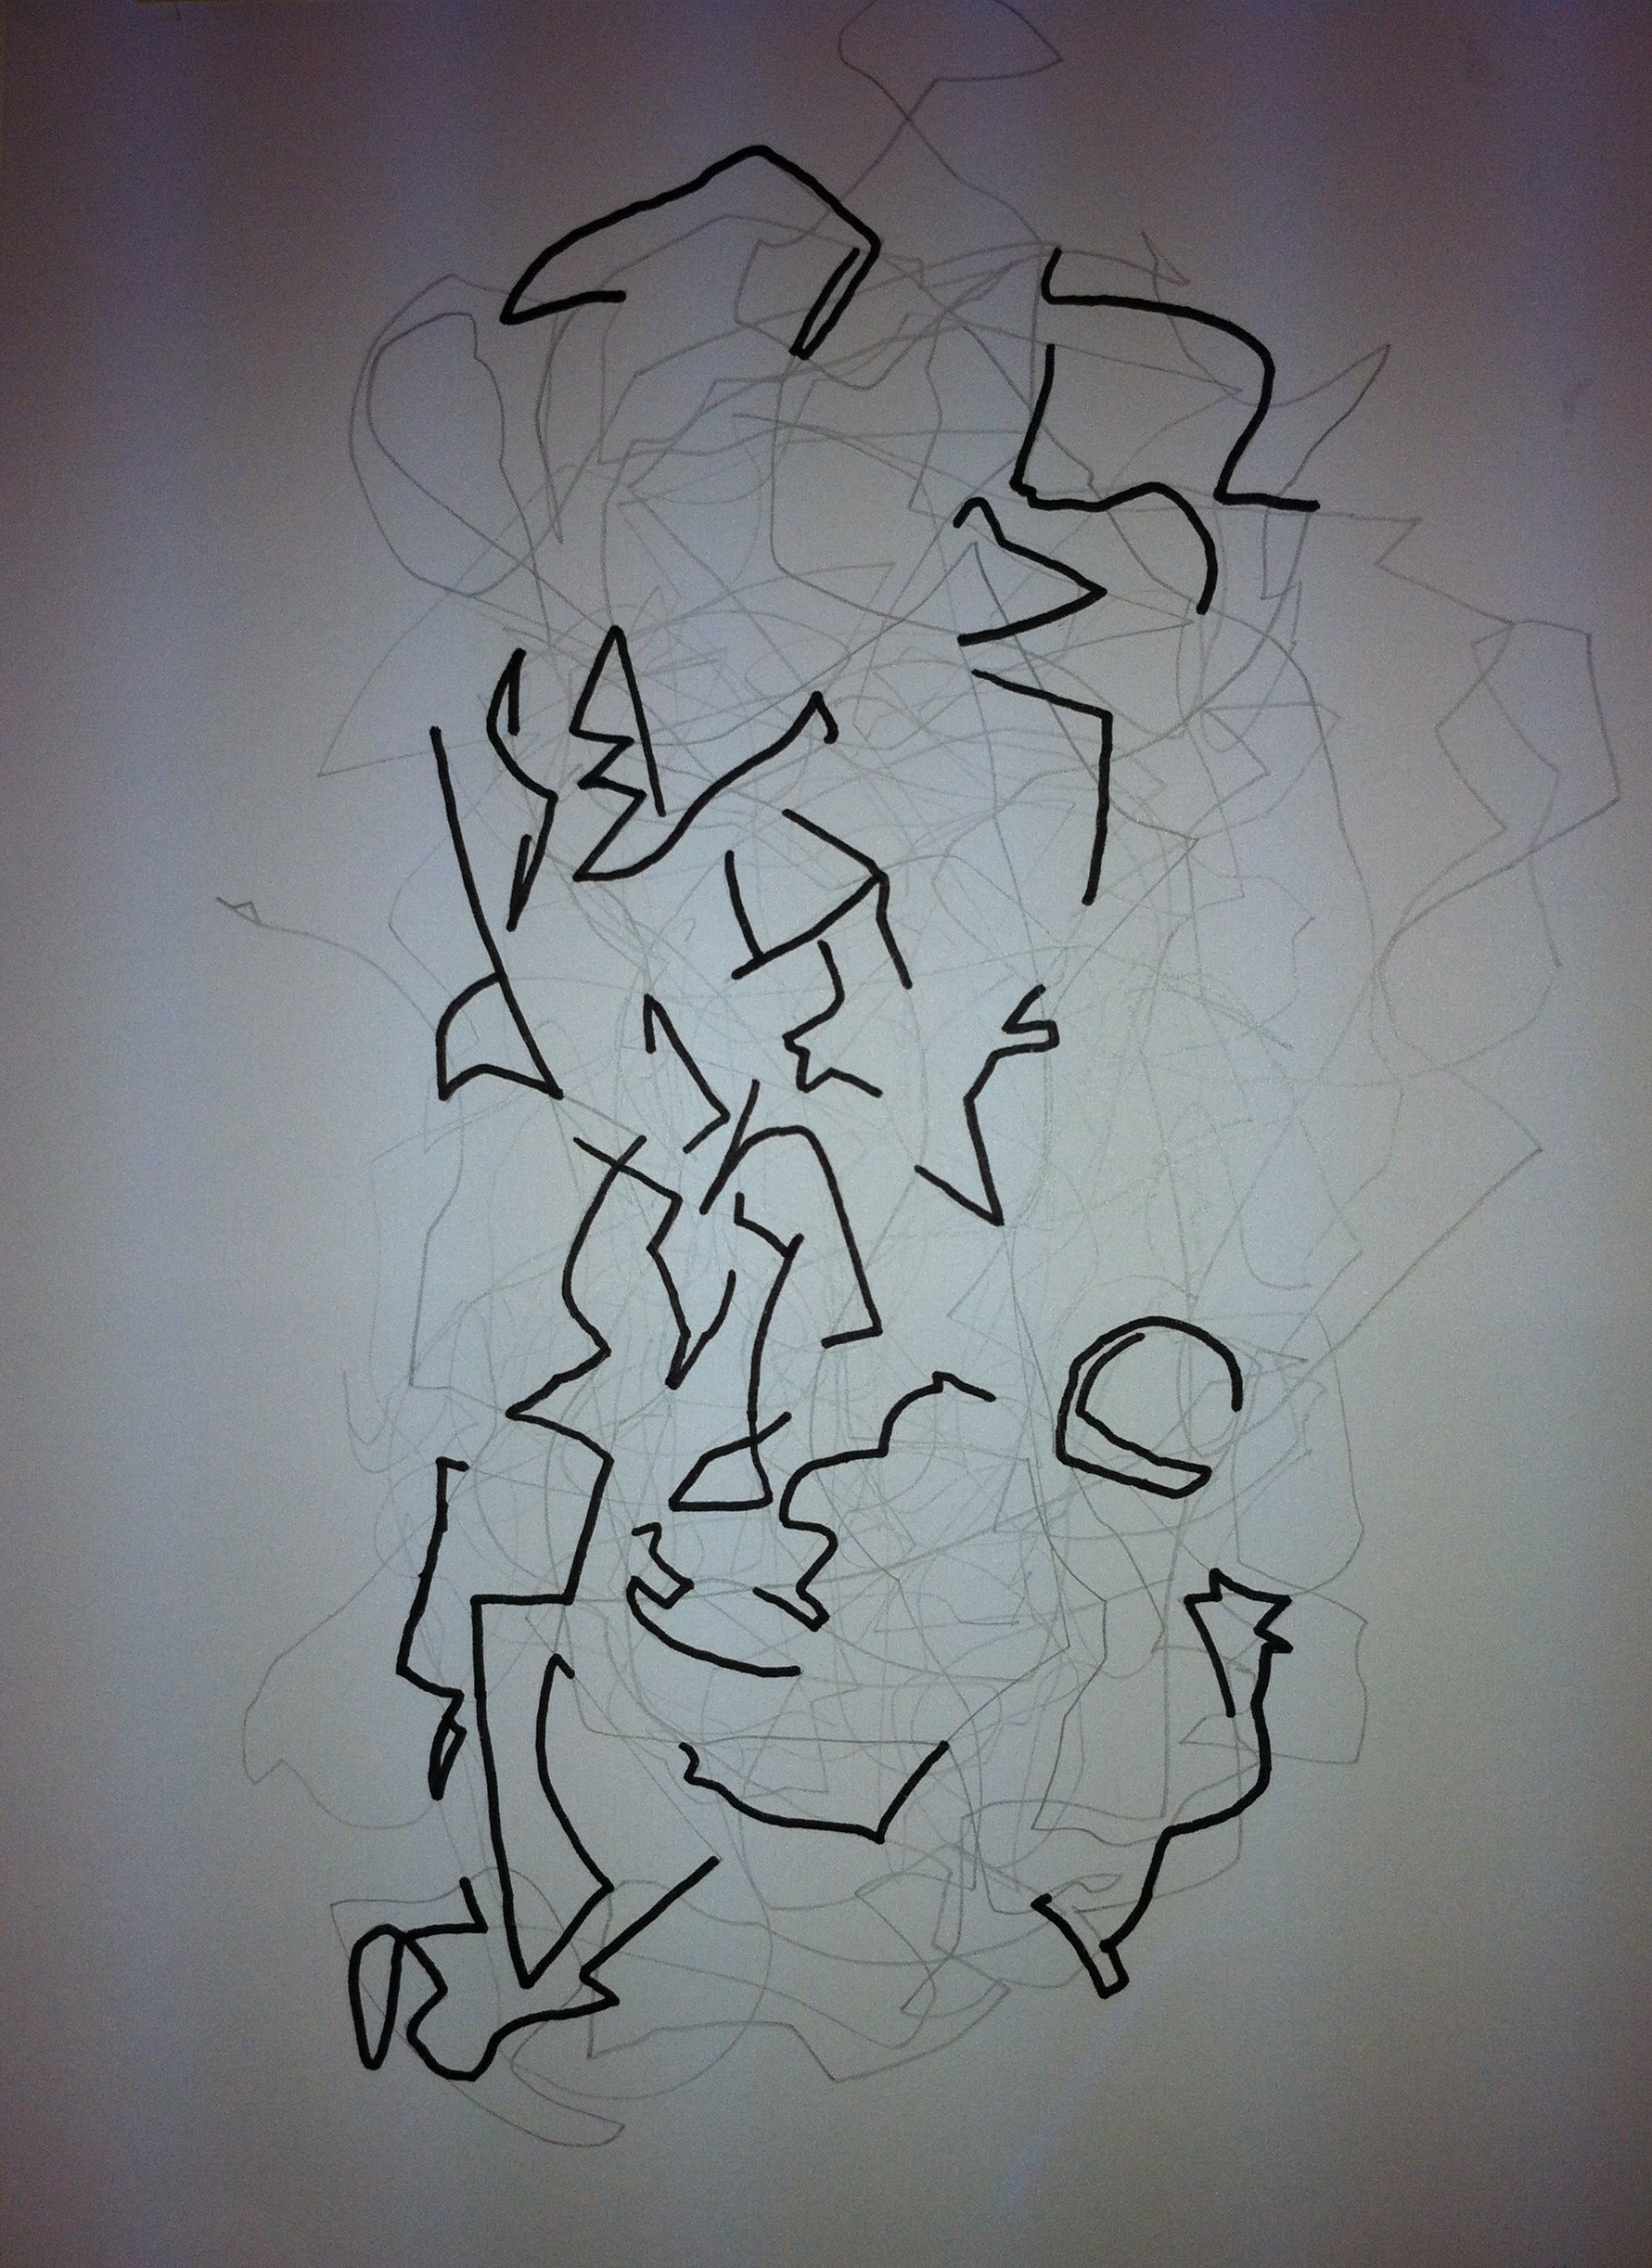 2011 /Pencil & marke on paper (Private own)